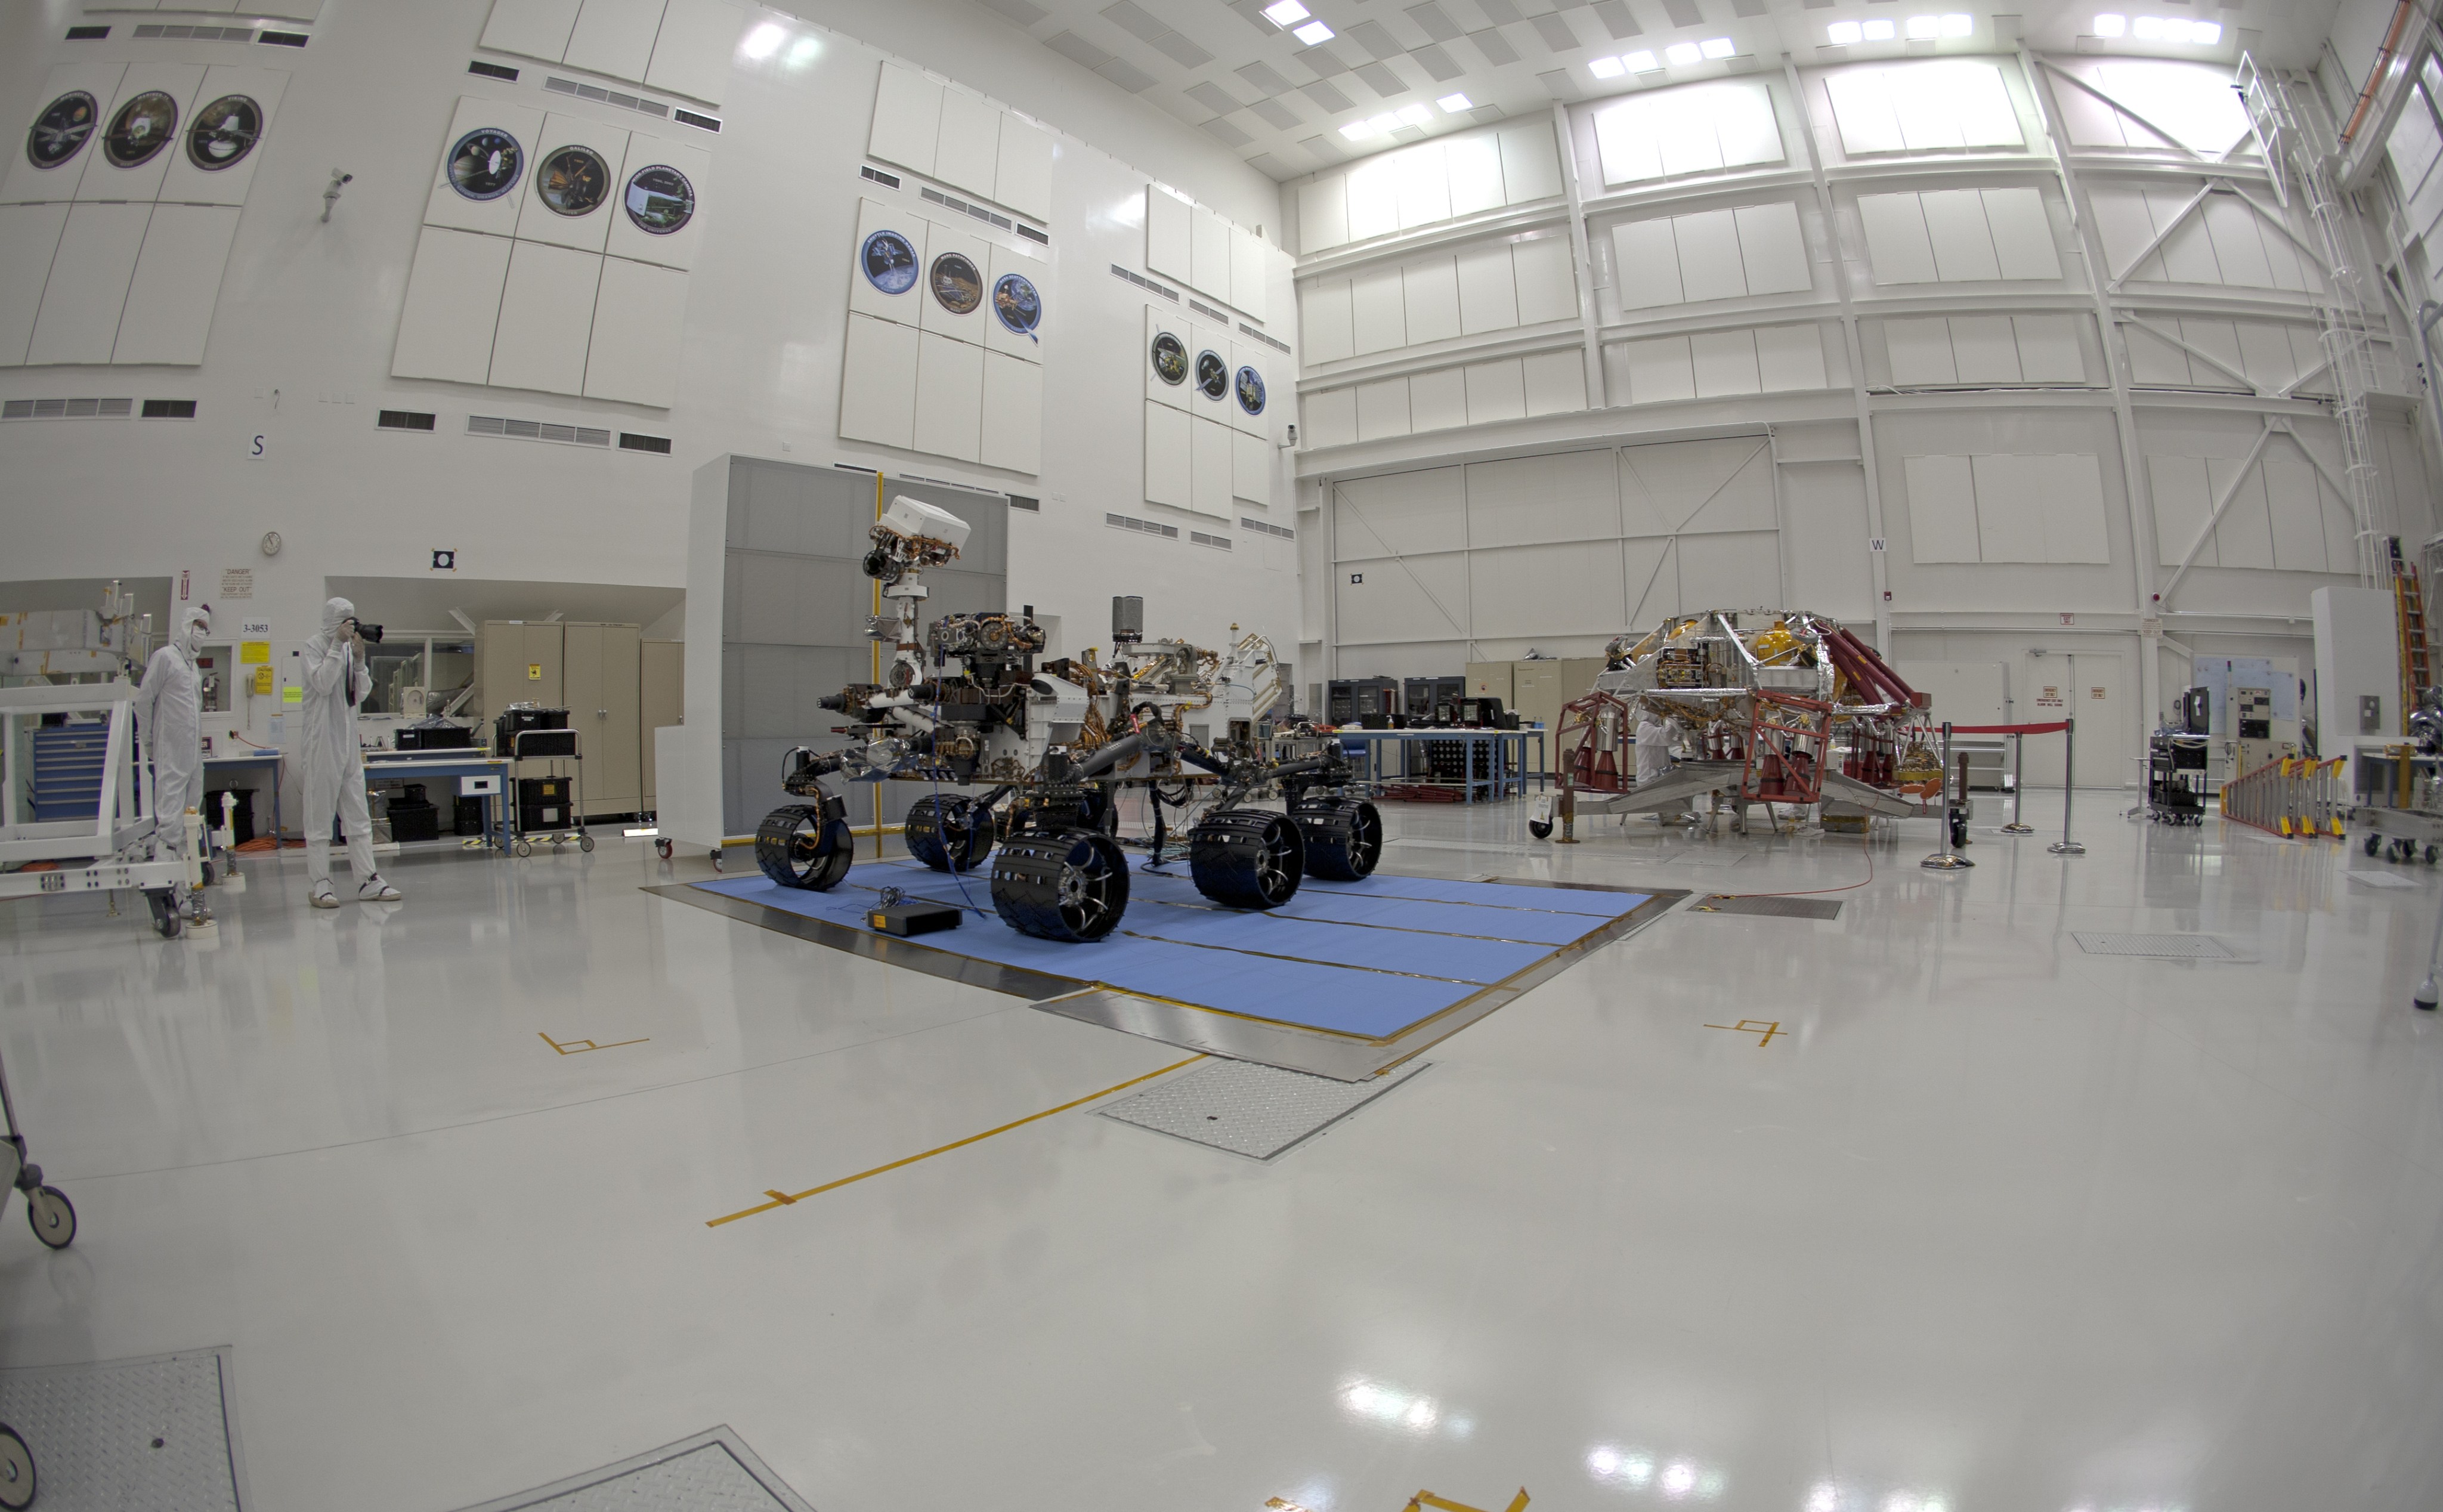 NASA's Curiosity rover and its powered descent vehicle pose for photographs prior to being integrated for launch at JPL's Spacecraft Assembly Facility.